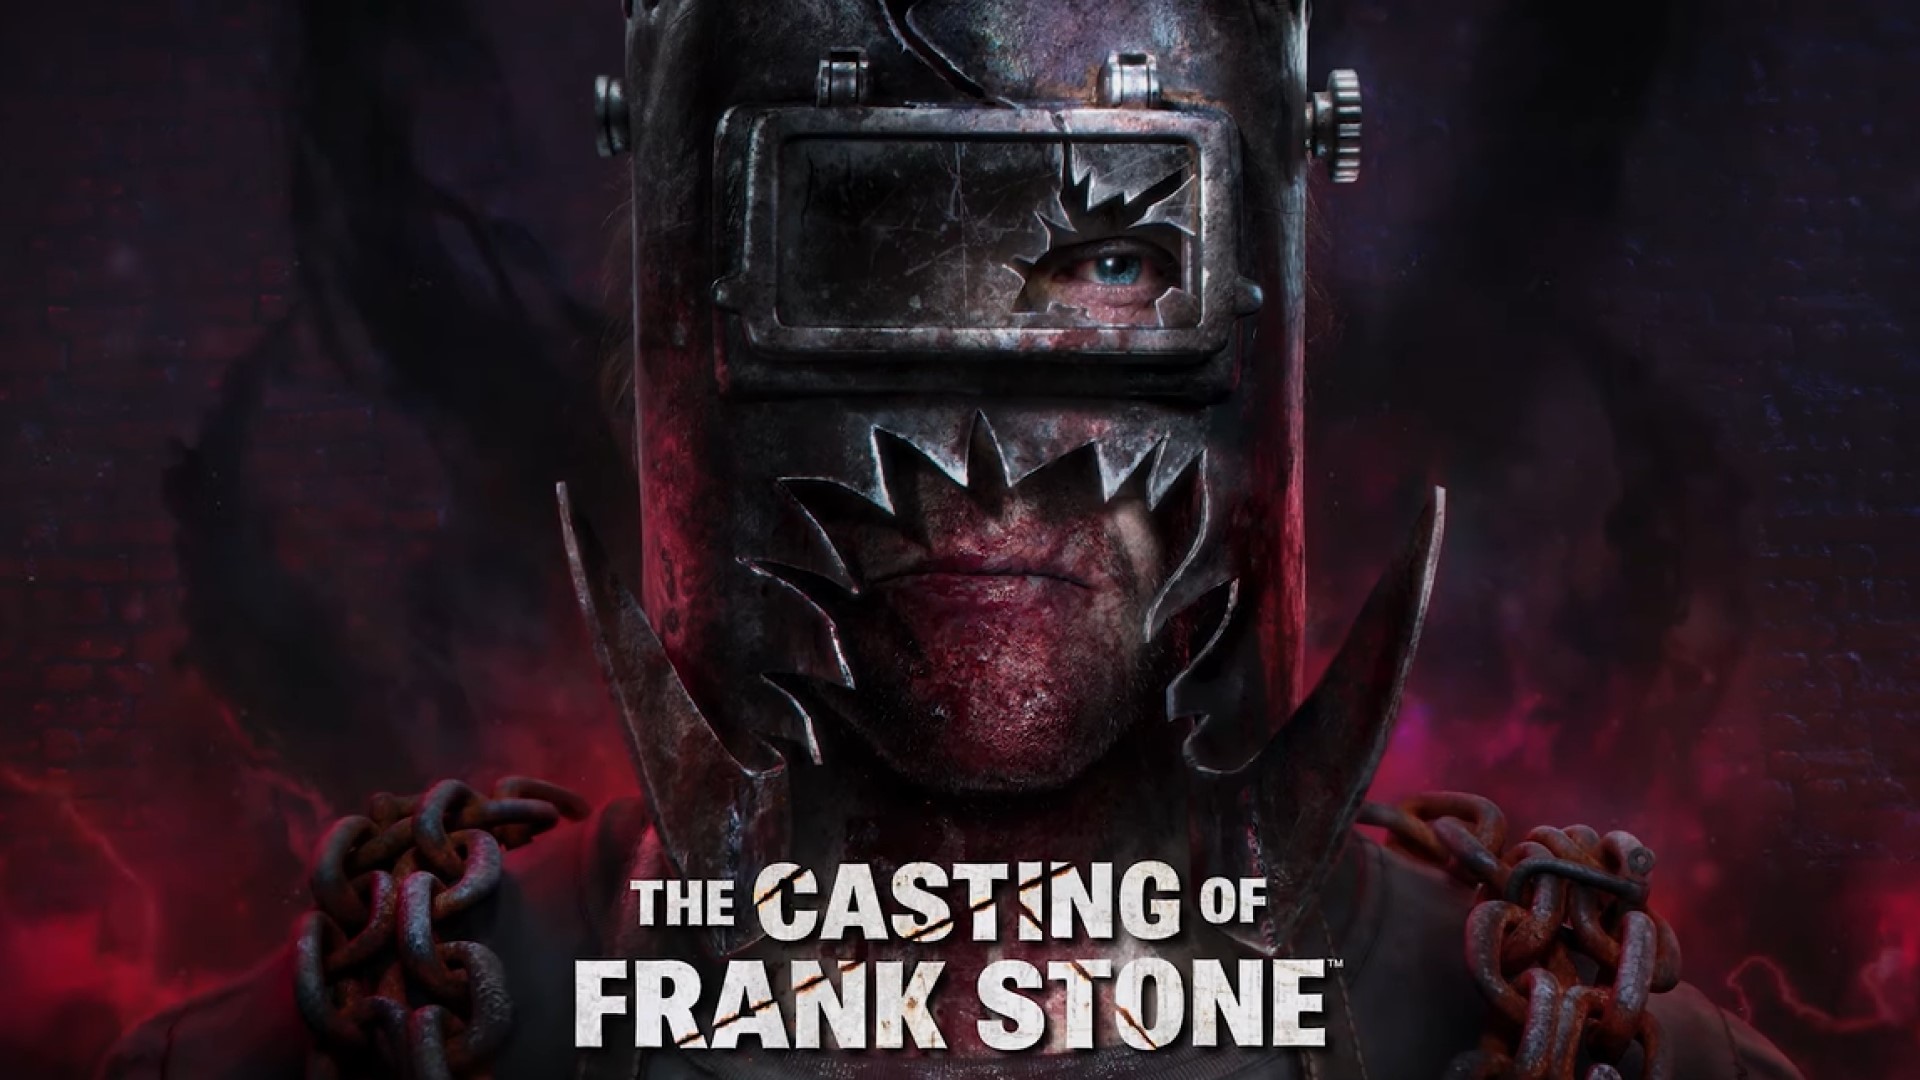 The Casting of Frank Stone